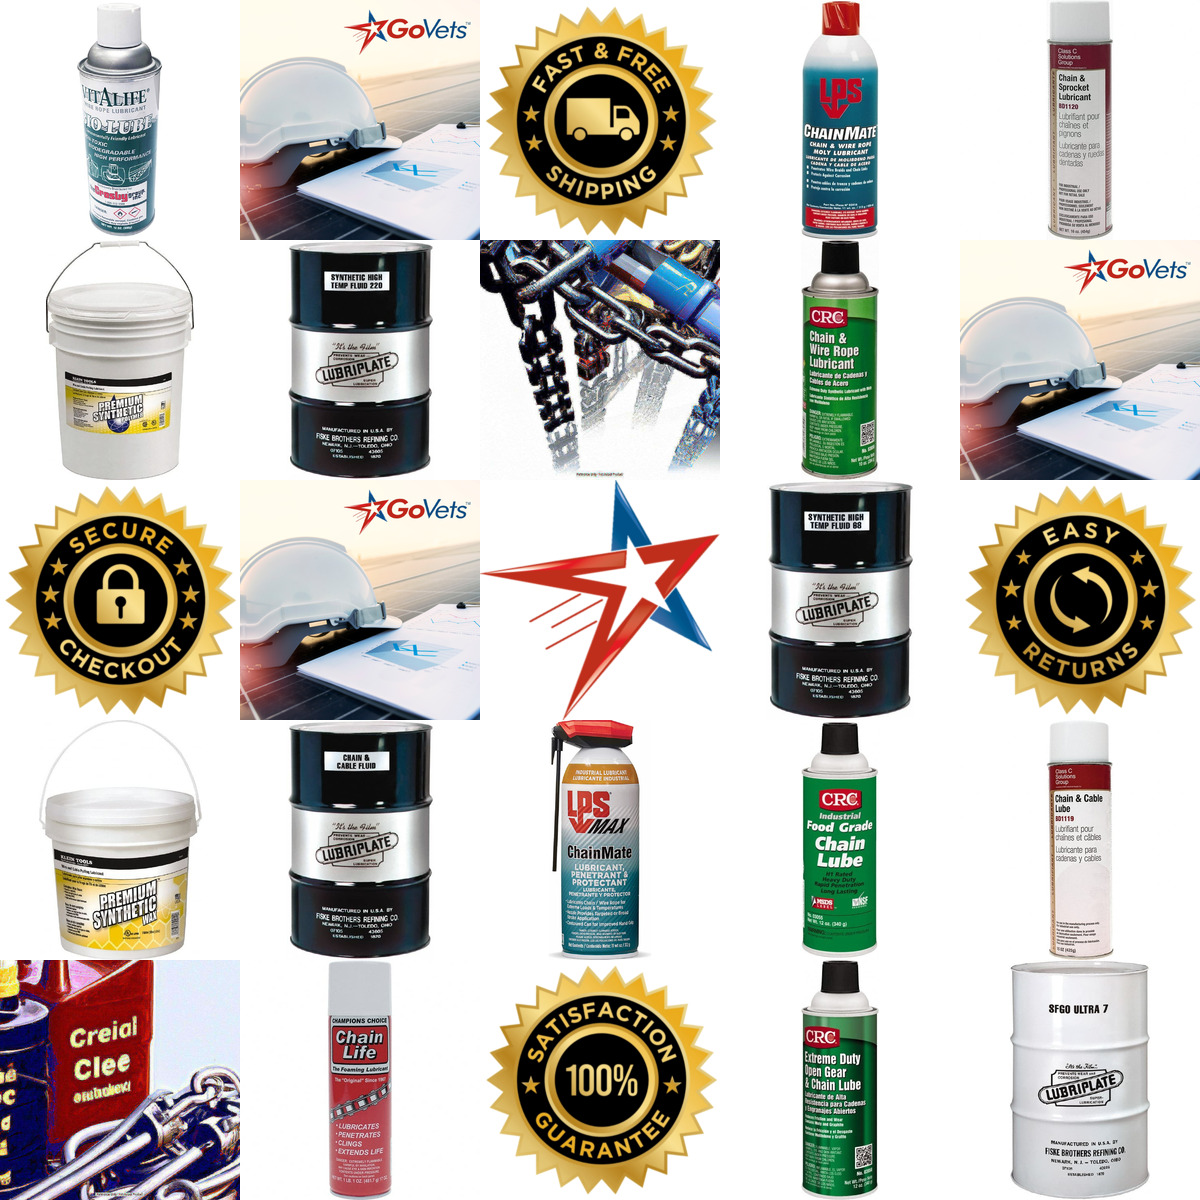 A selection of Chain and Cable Lubricants products on GoVets